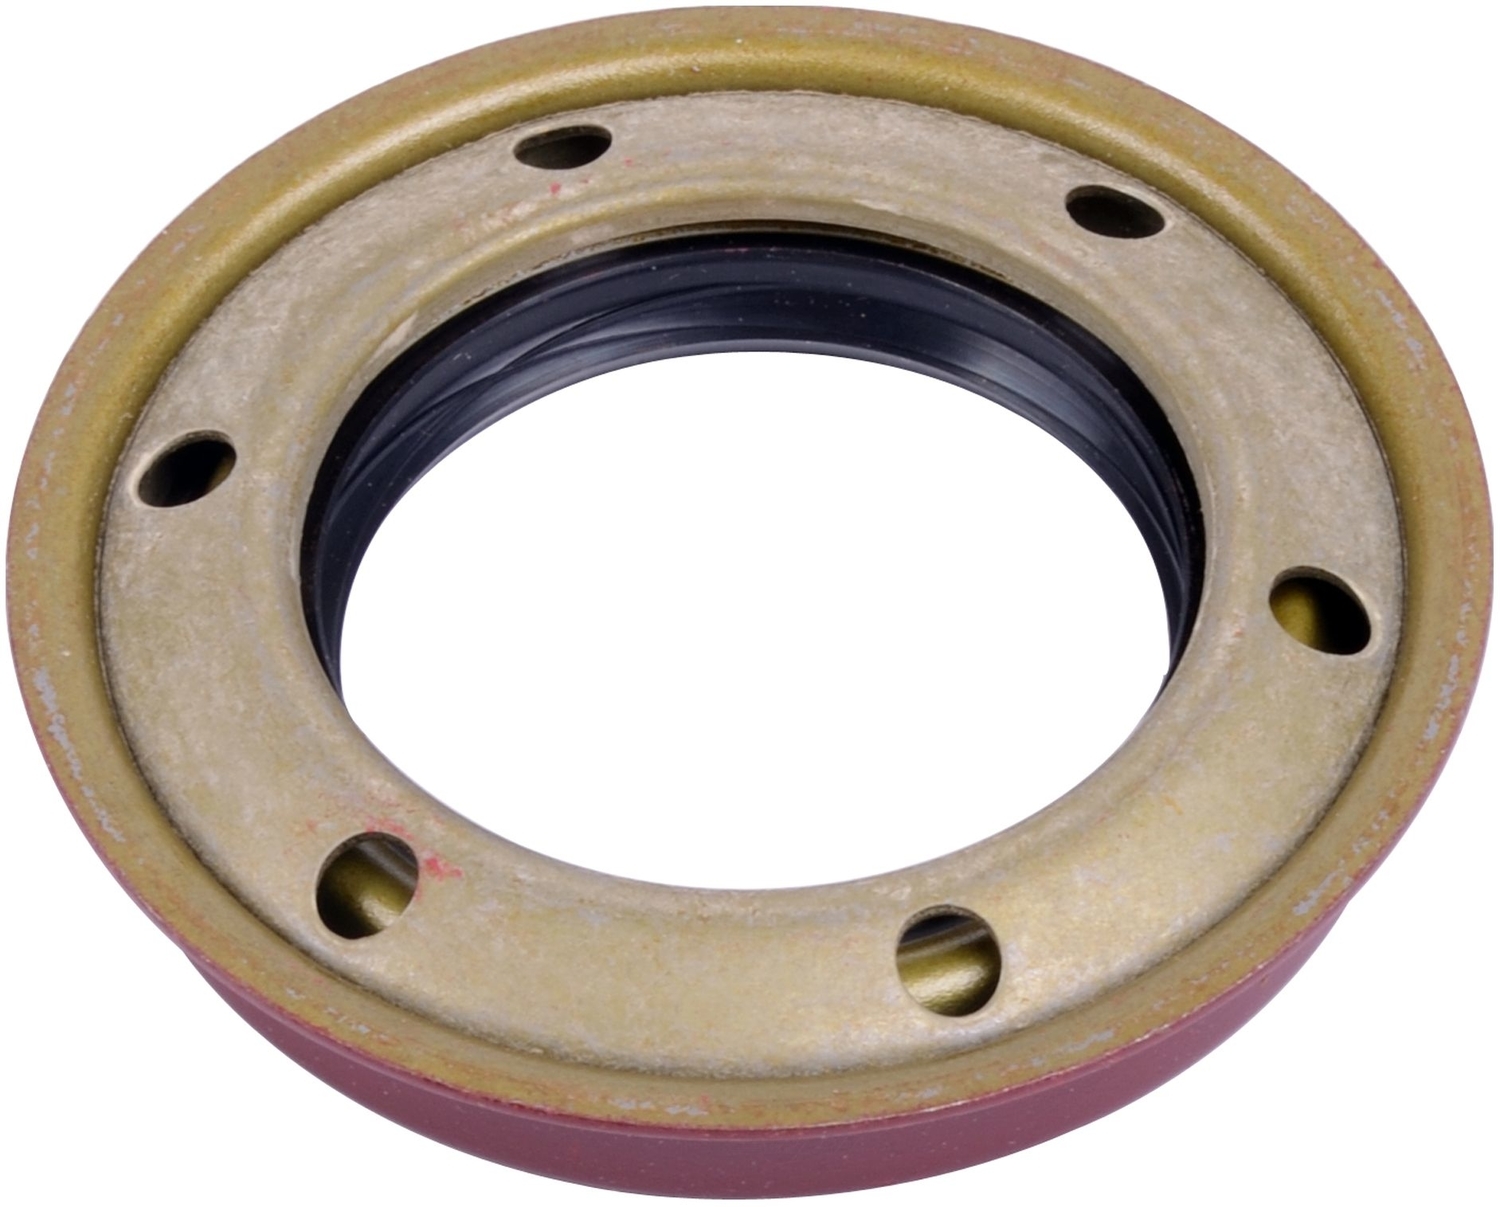 SKF (CHICAGO RAWHIDE) - Manual Trans Output Shaft Seal - SKF 16901